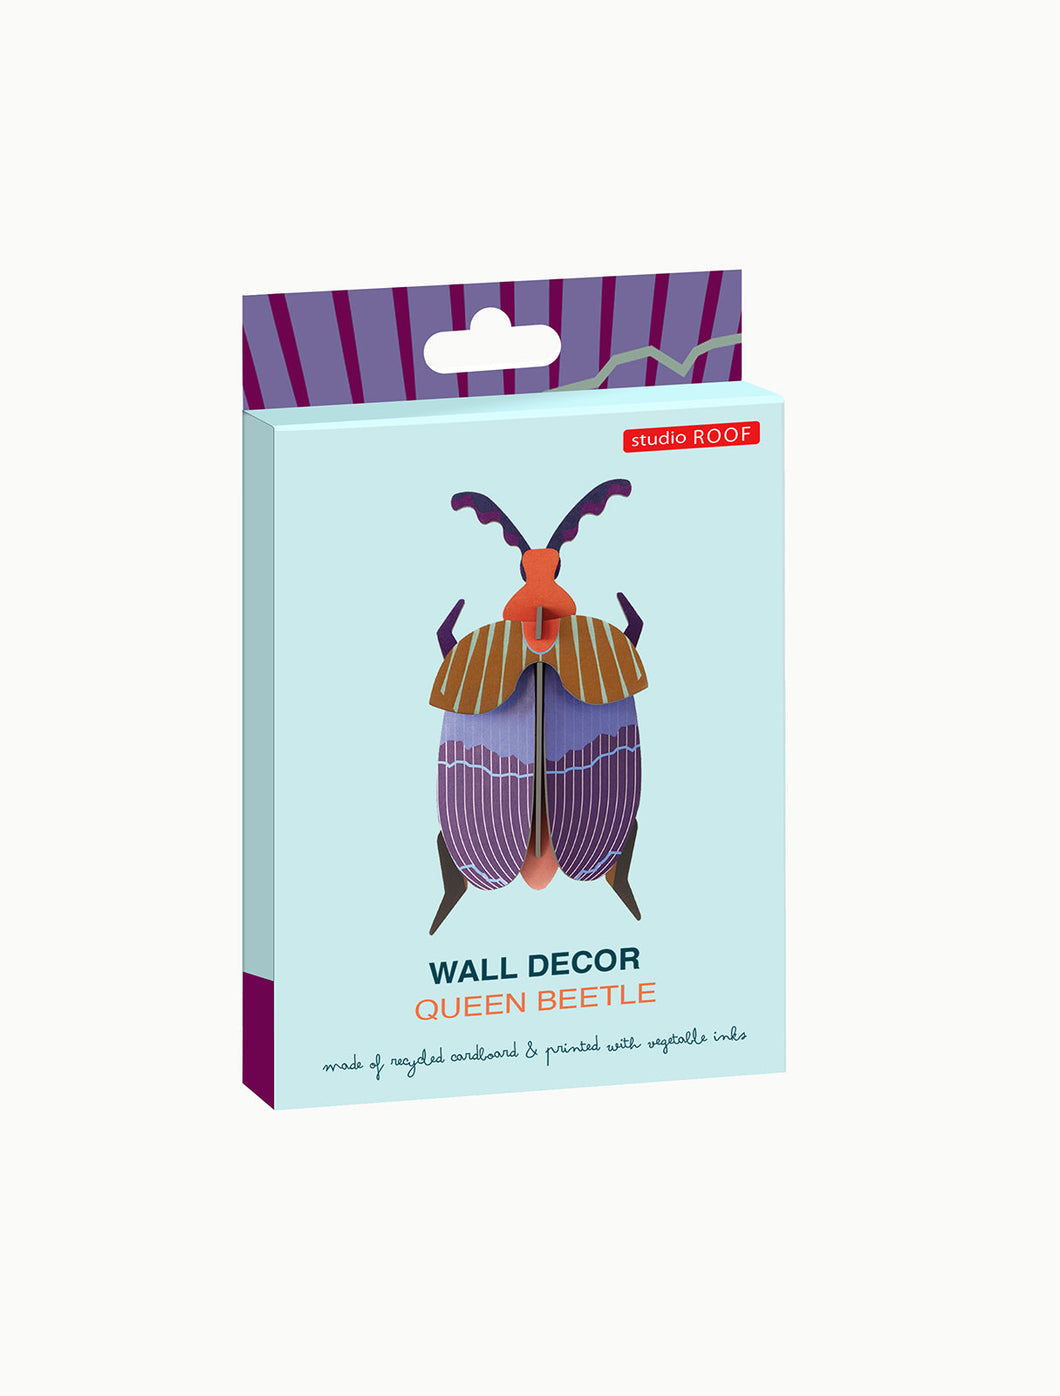 Queen beetle Wall Decoration